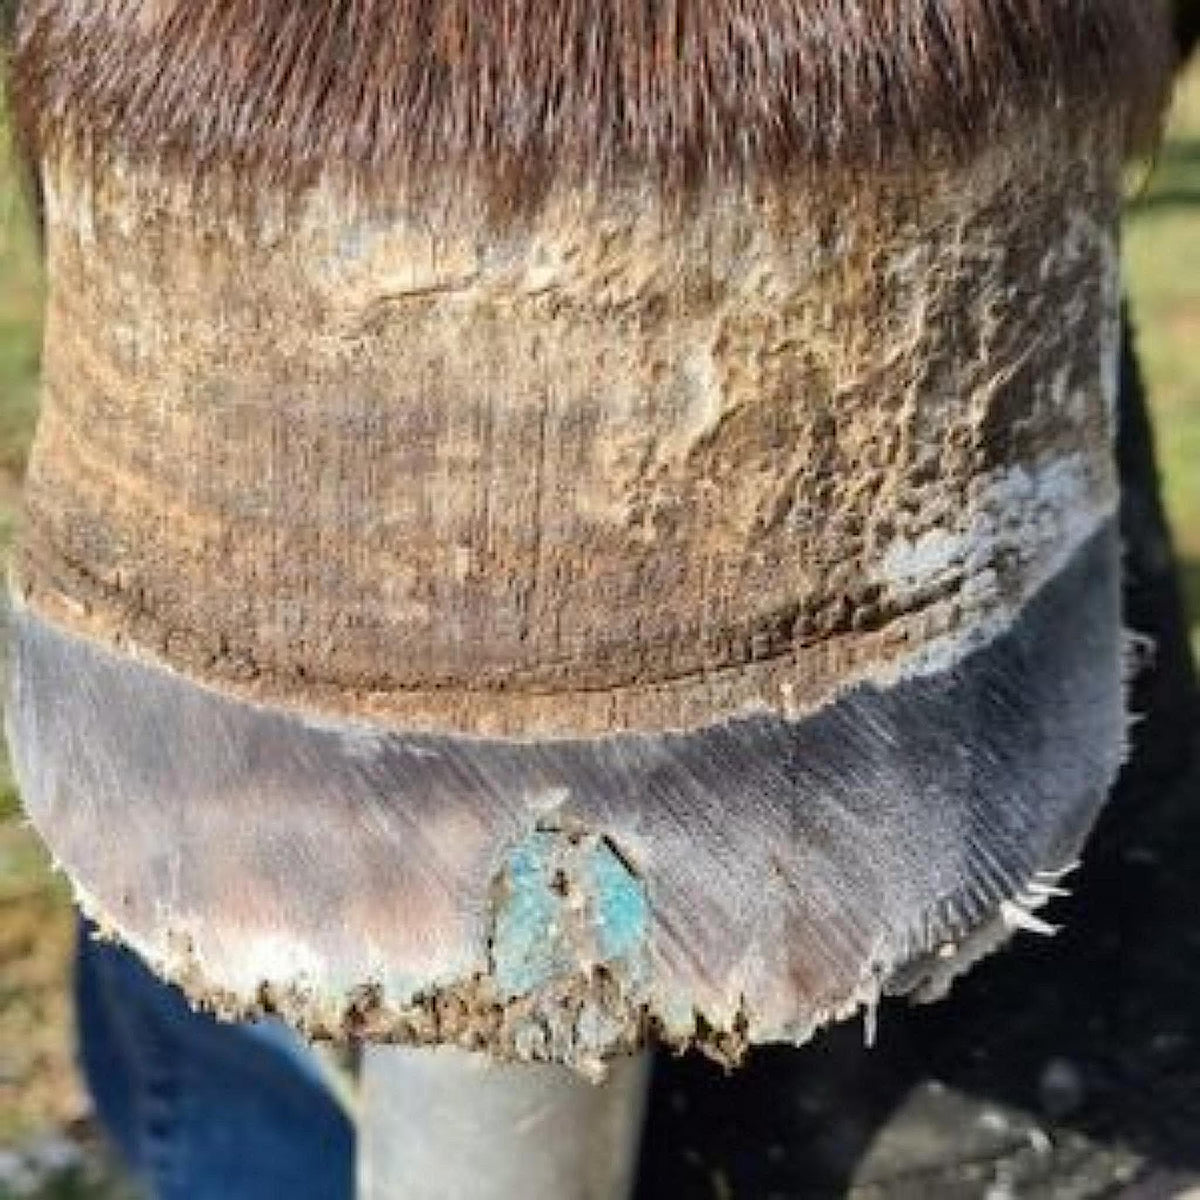 Blue Beeswax Balls filling cavity on lower part of horse&#39;s hoof.